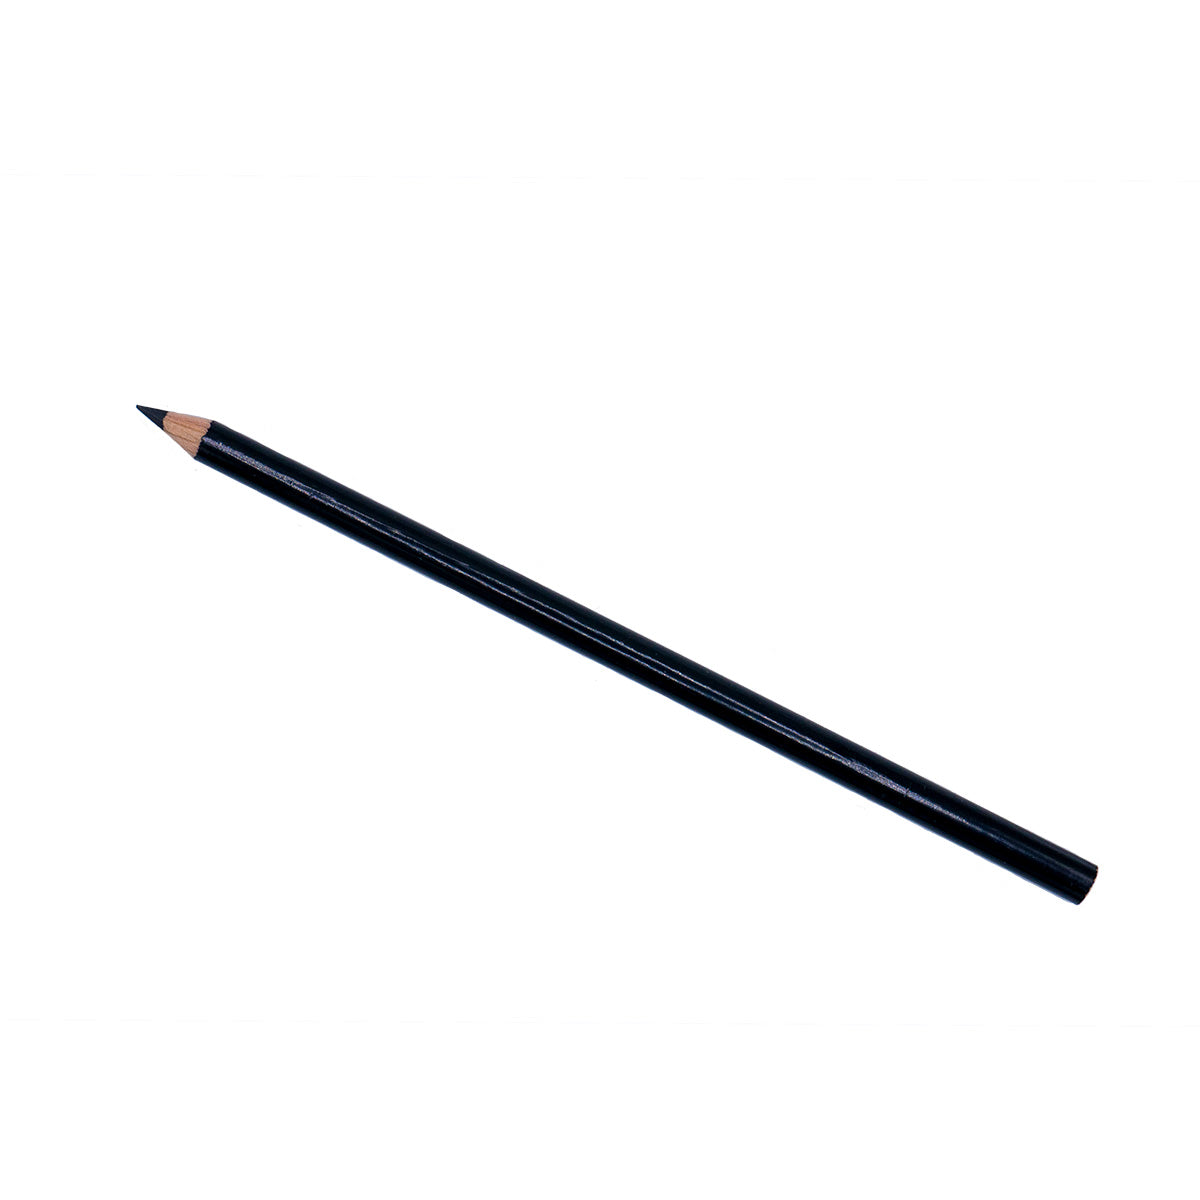 A singular black pencil. The point is angled up and to the left.